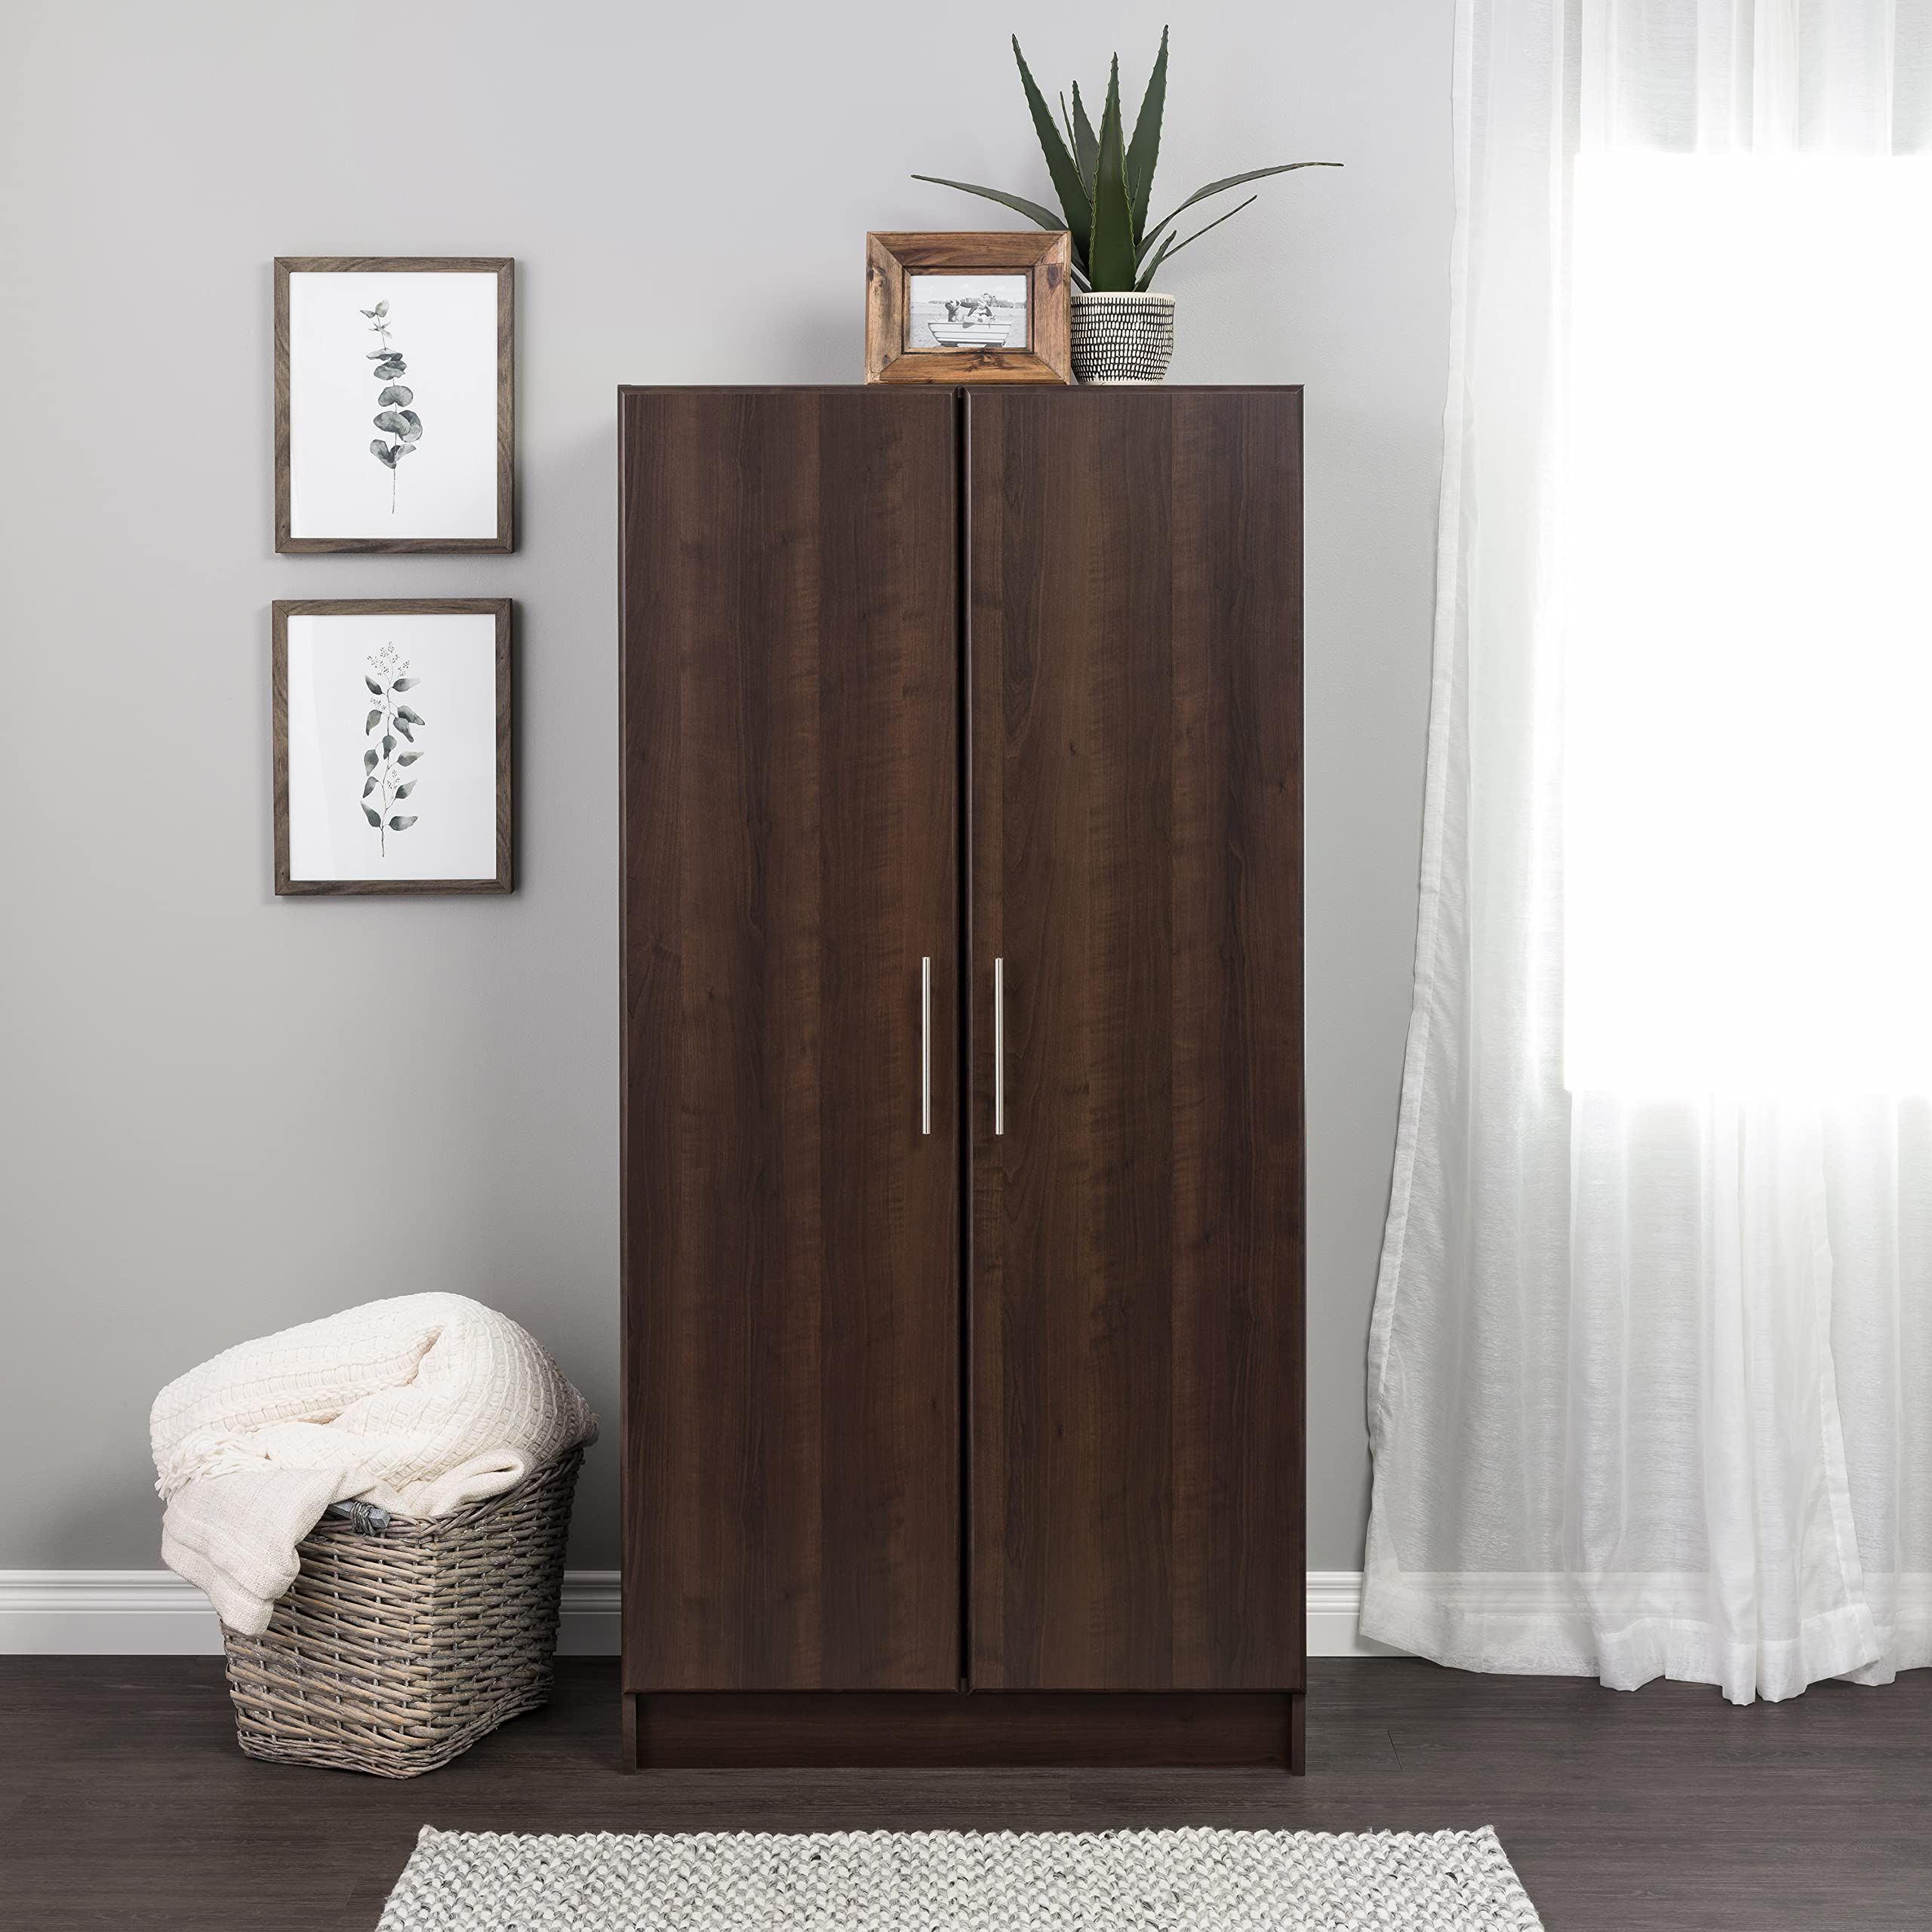 Espresso Wardrobes With Trendy Amazon: Prepac Elite Functional Wardrobe Closet With Hanging Rail And  Shelves, Simplistic 2 Door Armoire Portable Closet 21" D X 32" W X 65" H,  Espresso, Eesw 3264 K : Home & Kitchen (View 2 of 10)